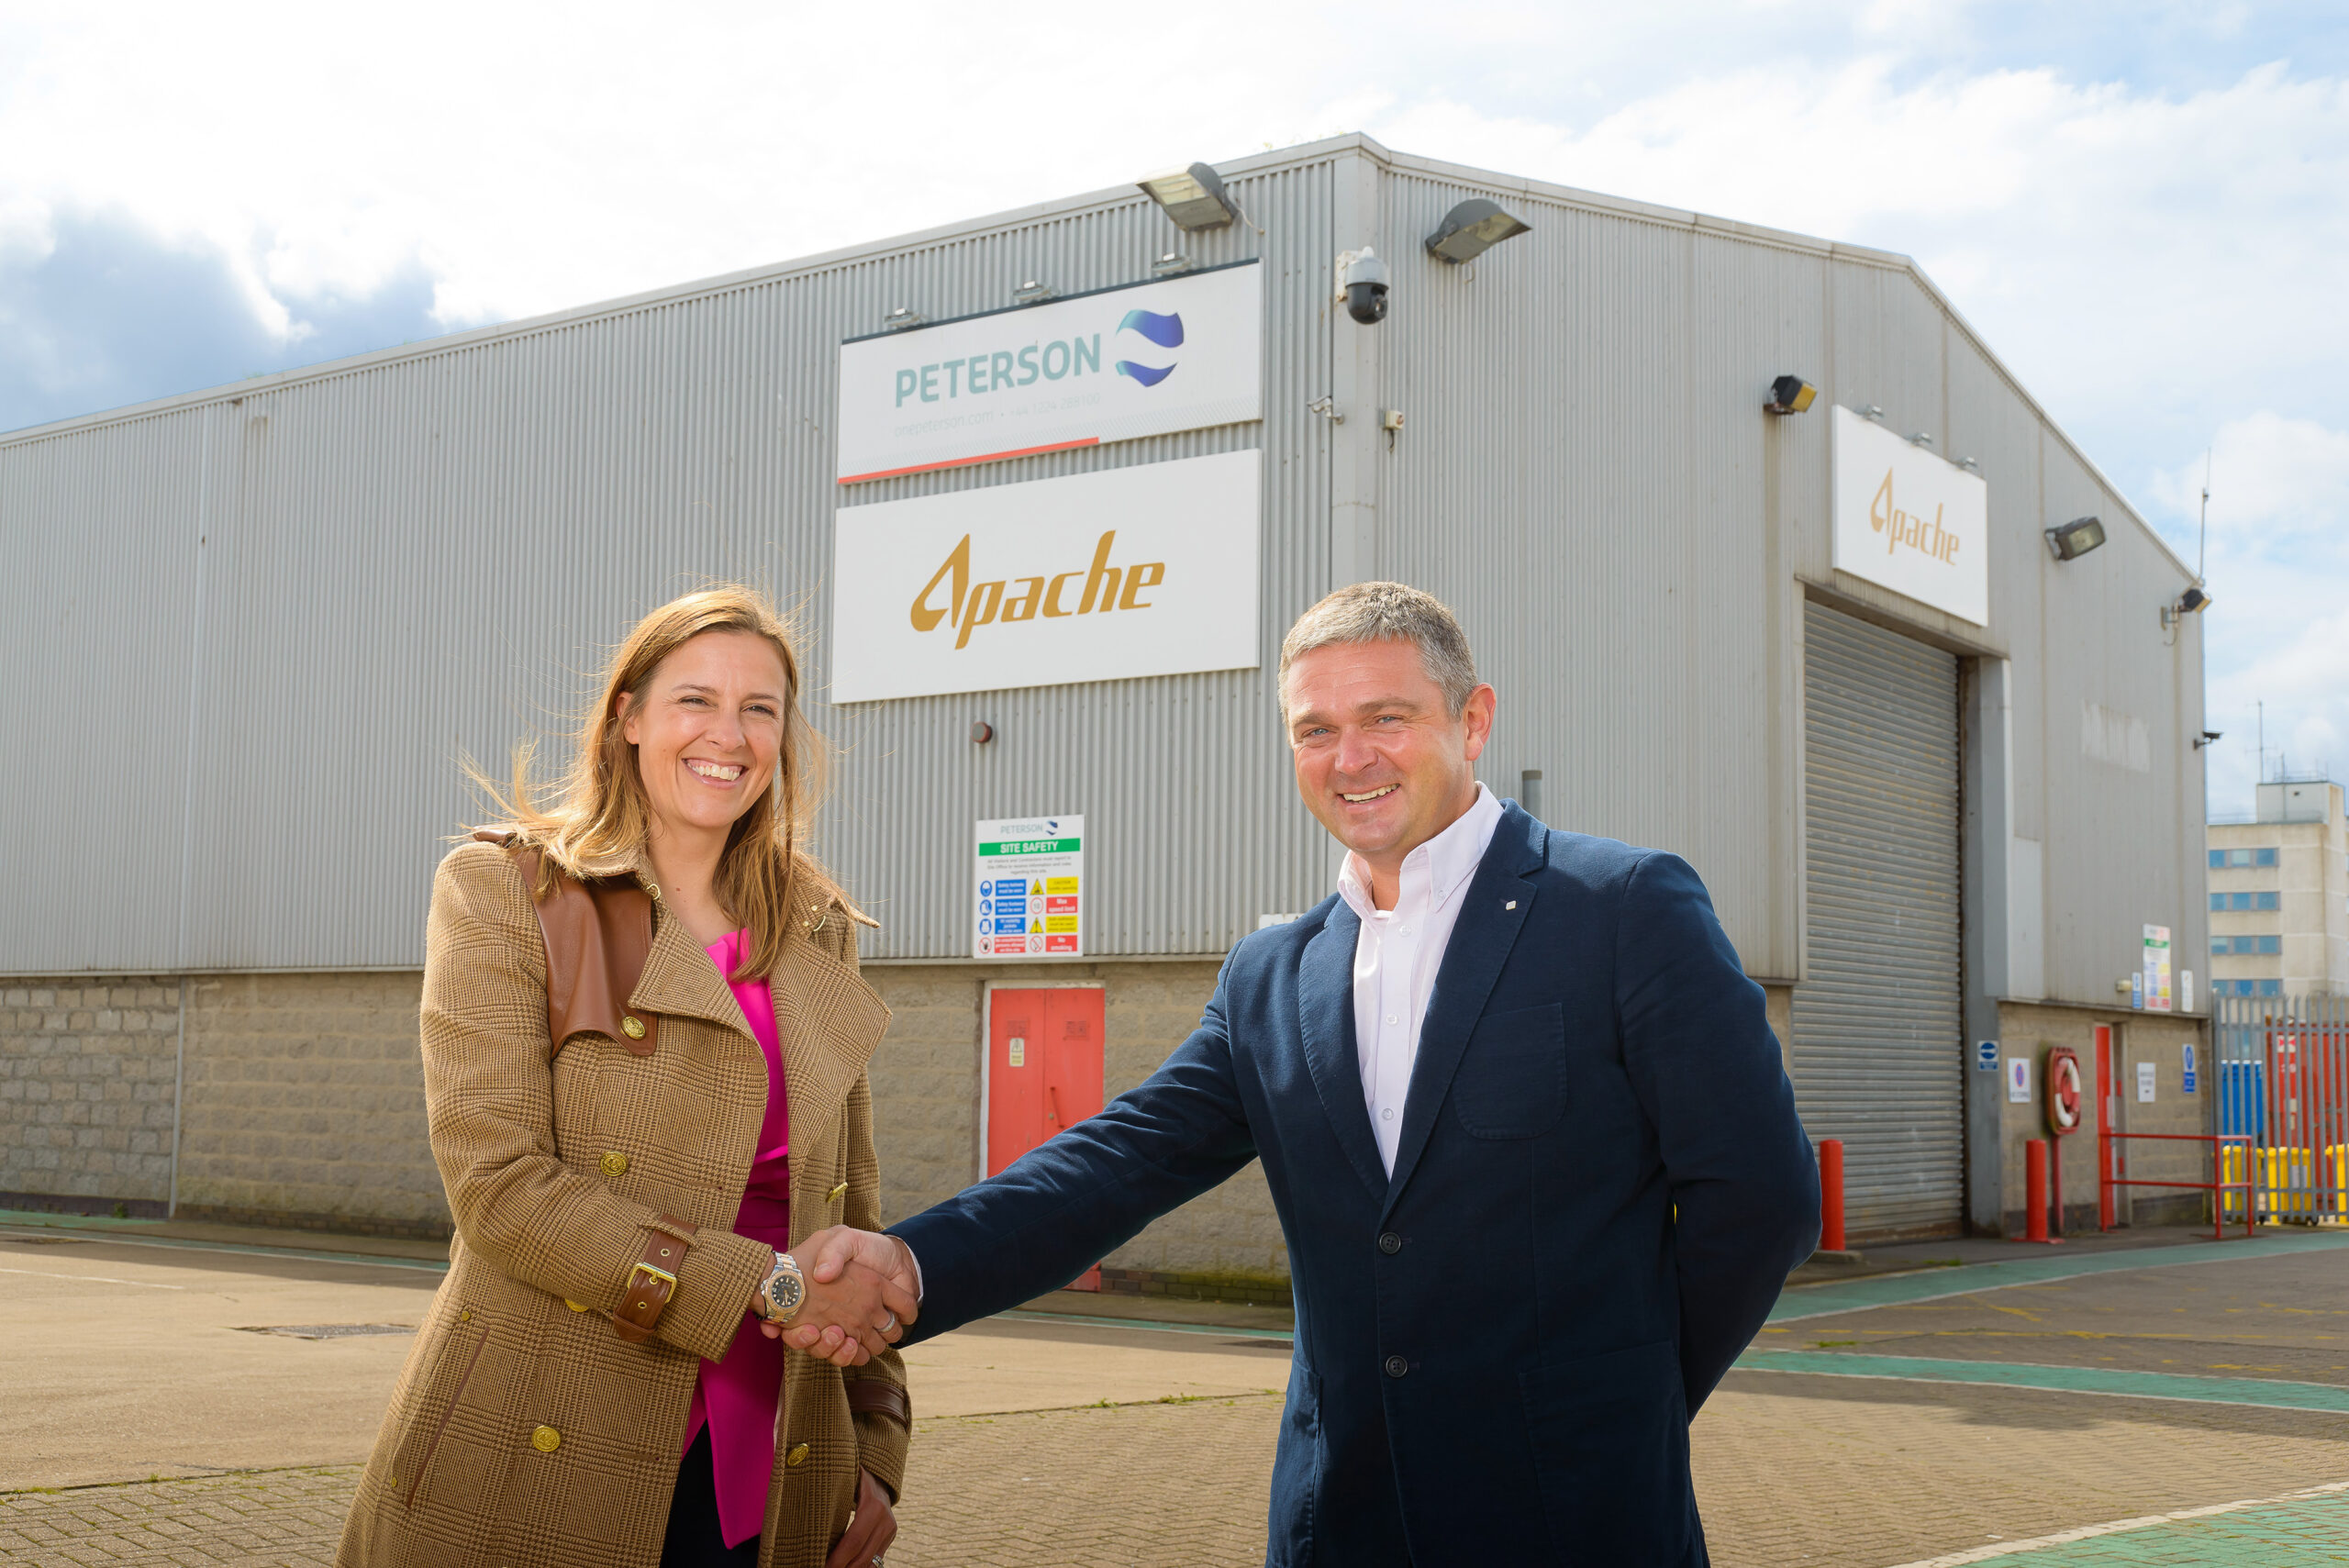 MEMBER NEWS: Peterson Energy Logistics awarded logistics contract from Apache North Sea